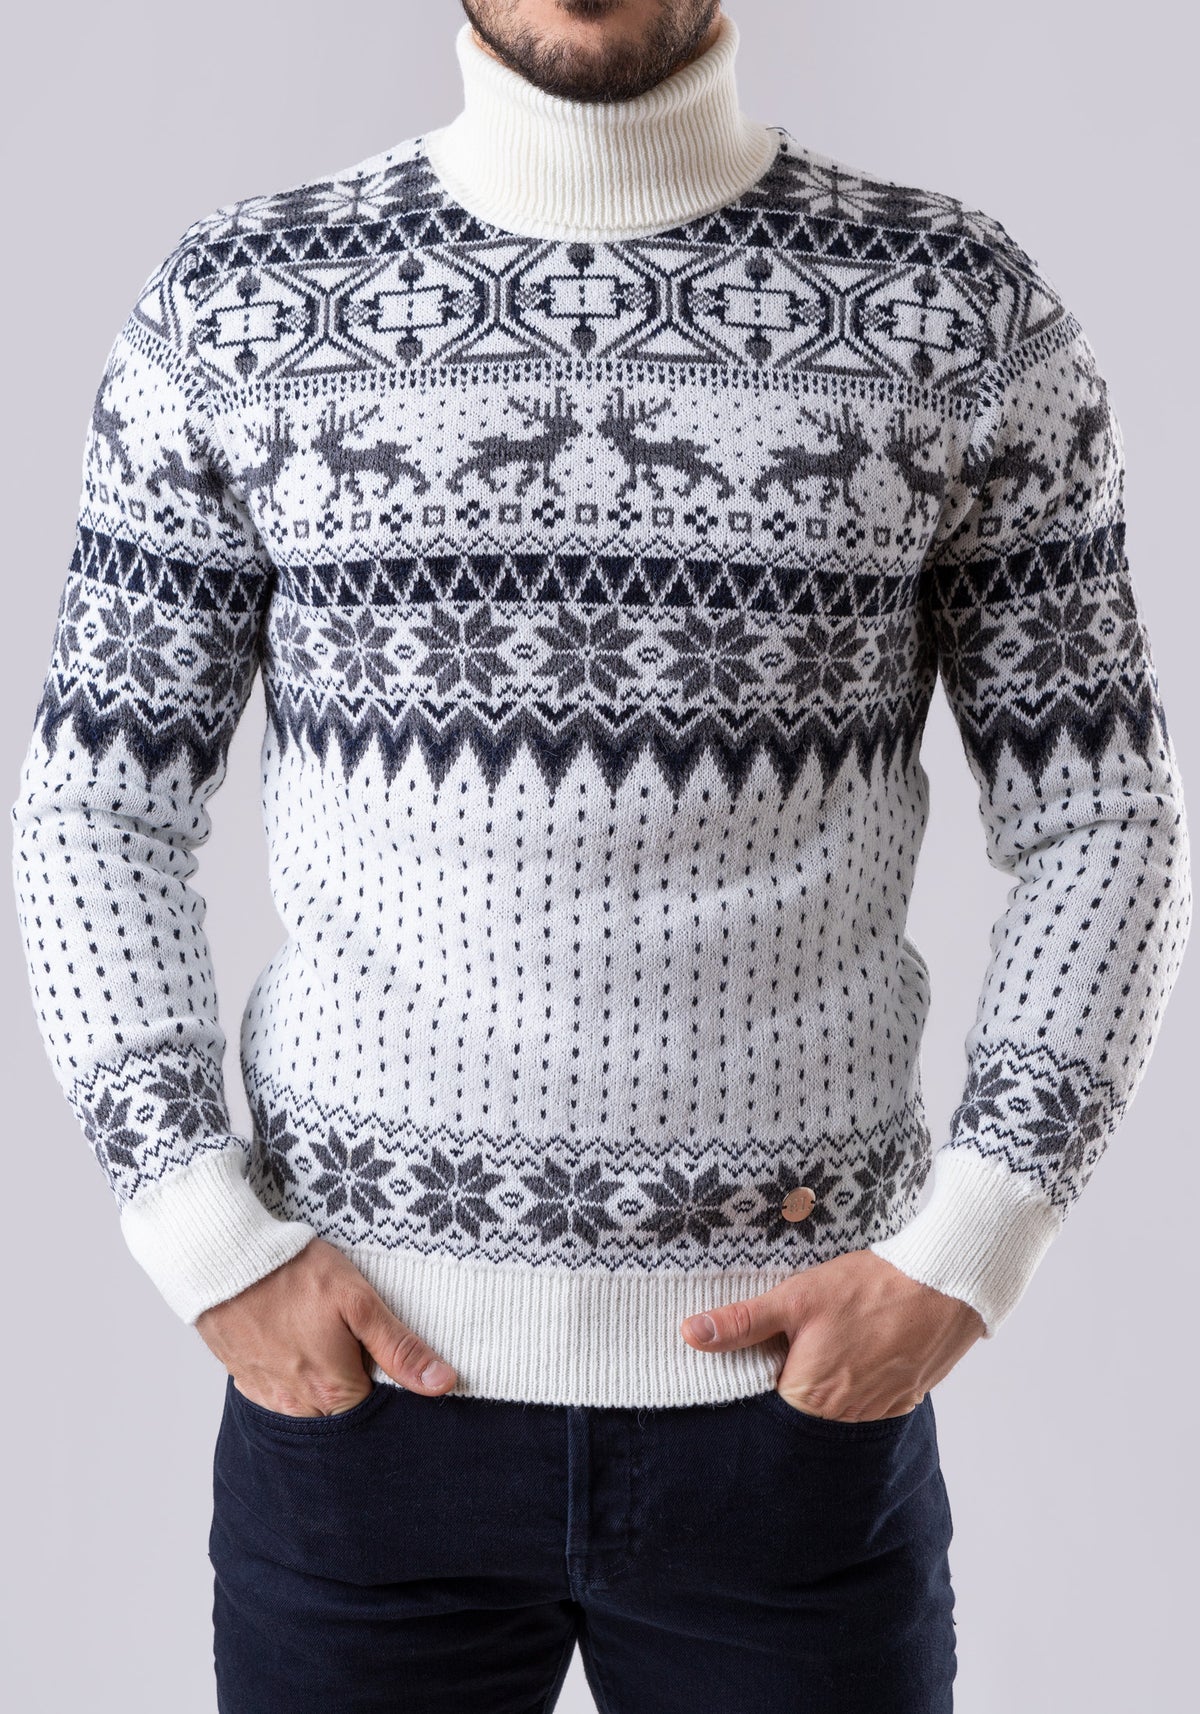 Knitted sweater white